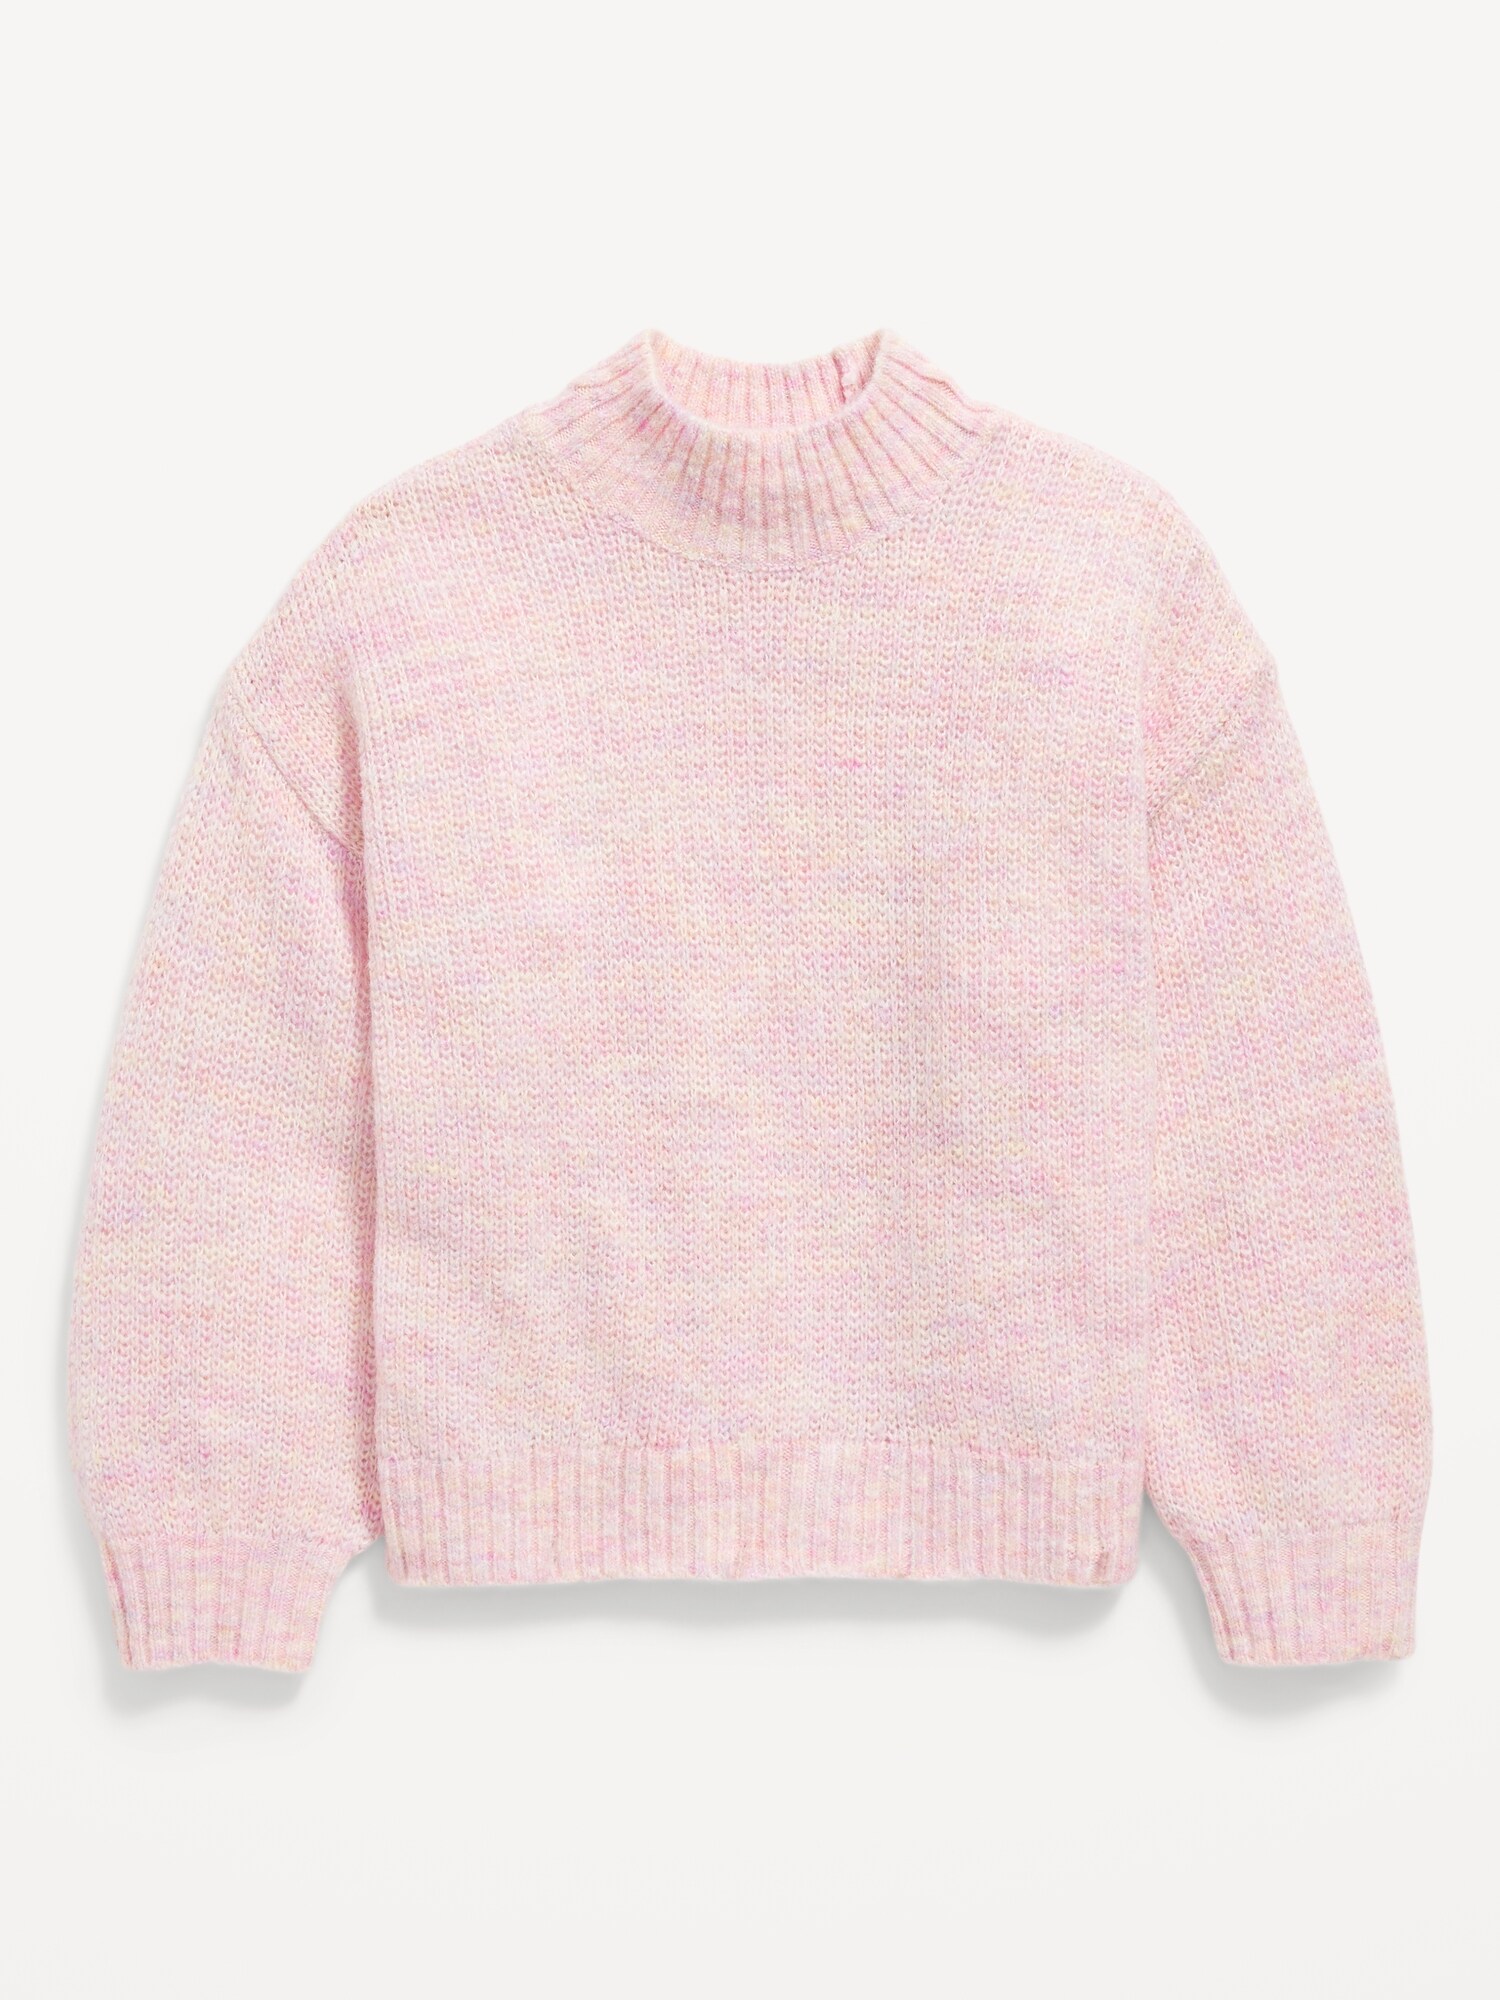 Cozy Mock-Neck Shaker-Stitch Cocoon Sweater for Girls | Old Navy